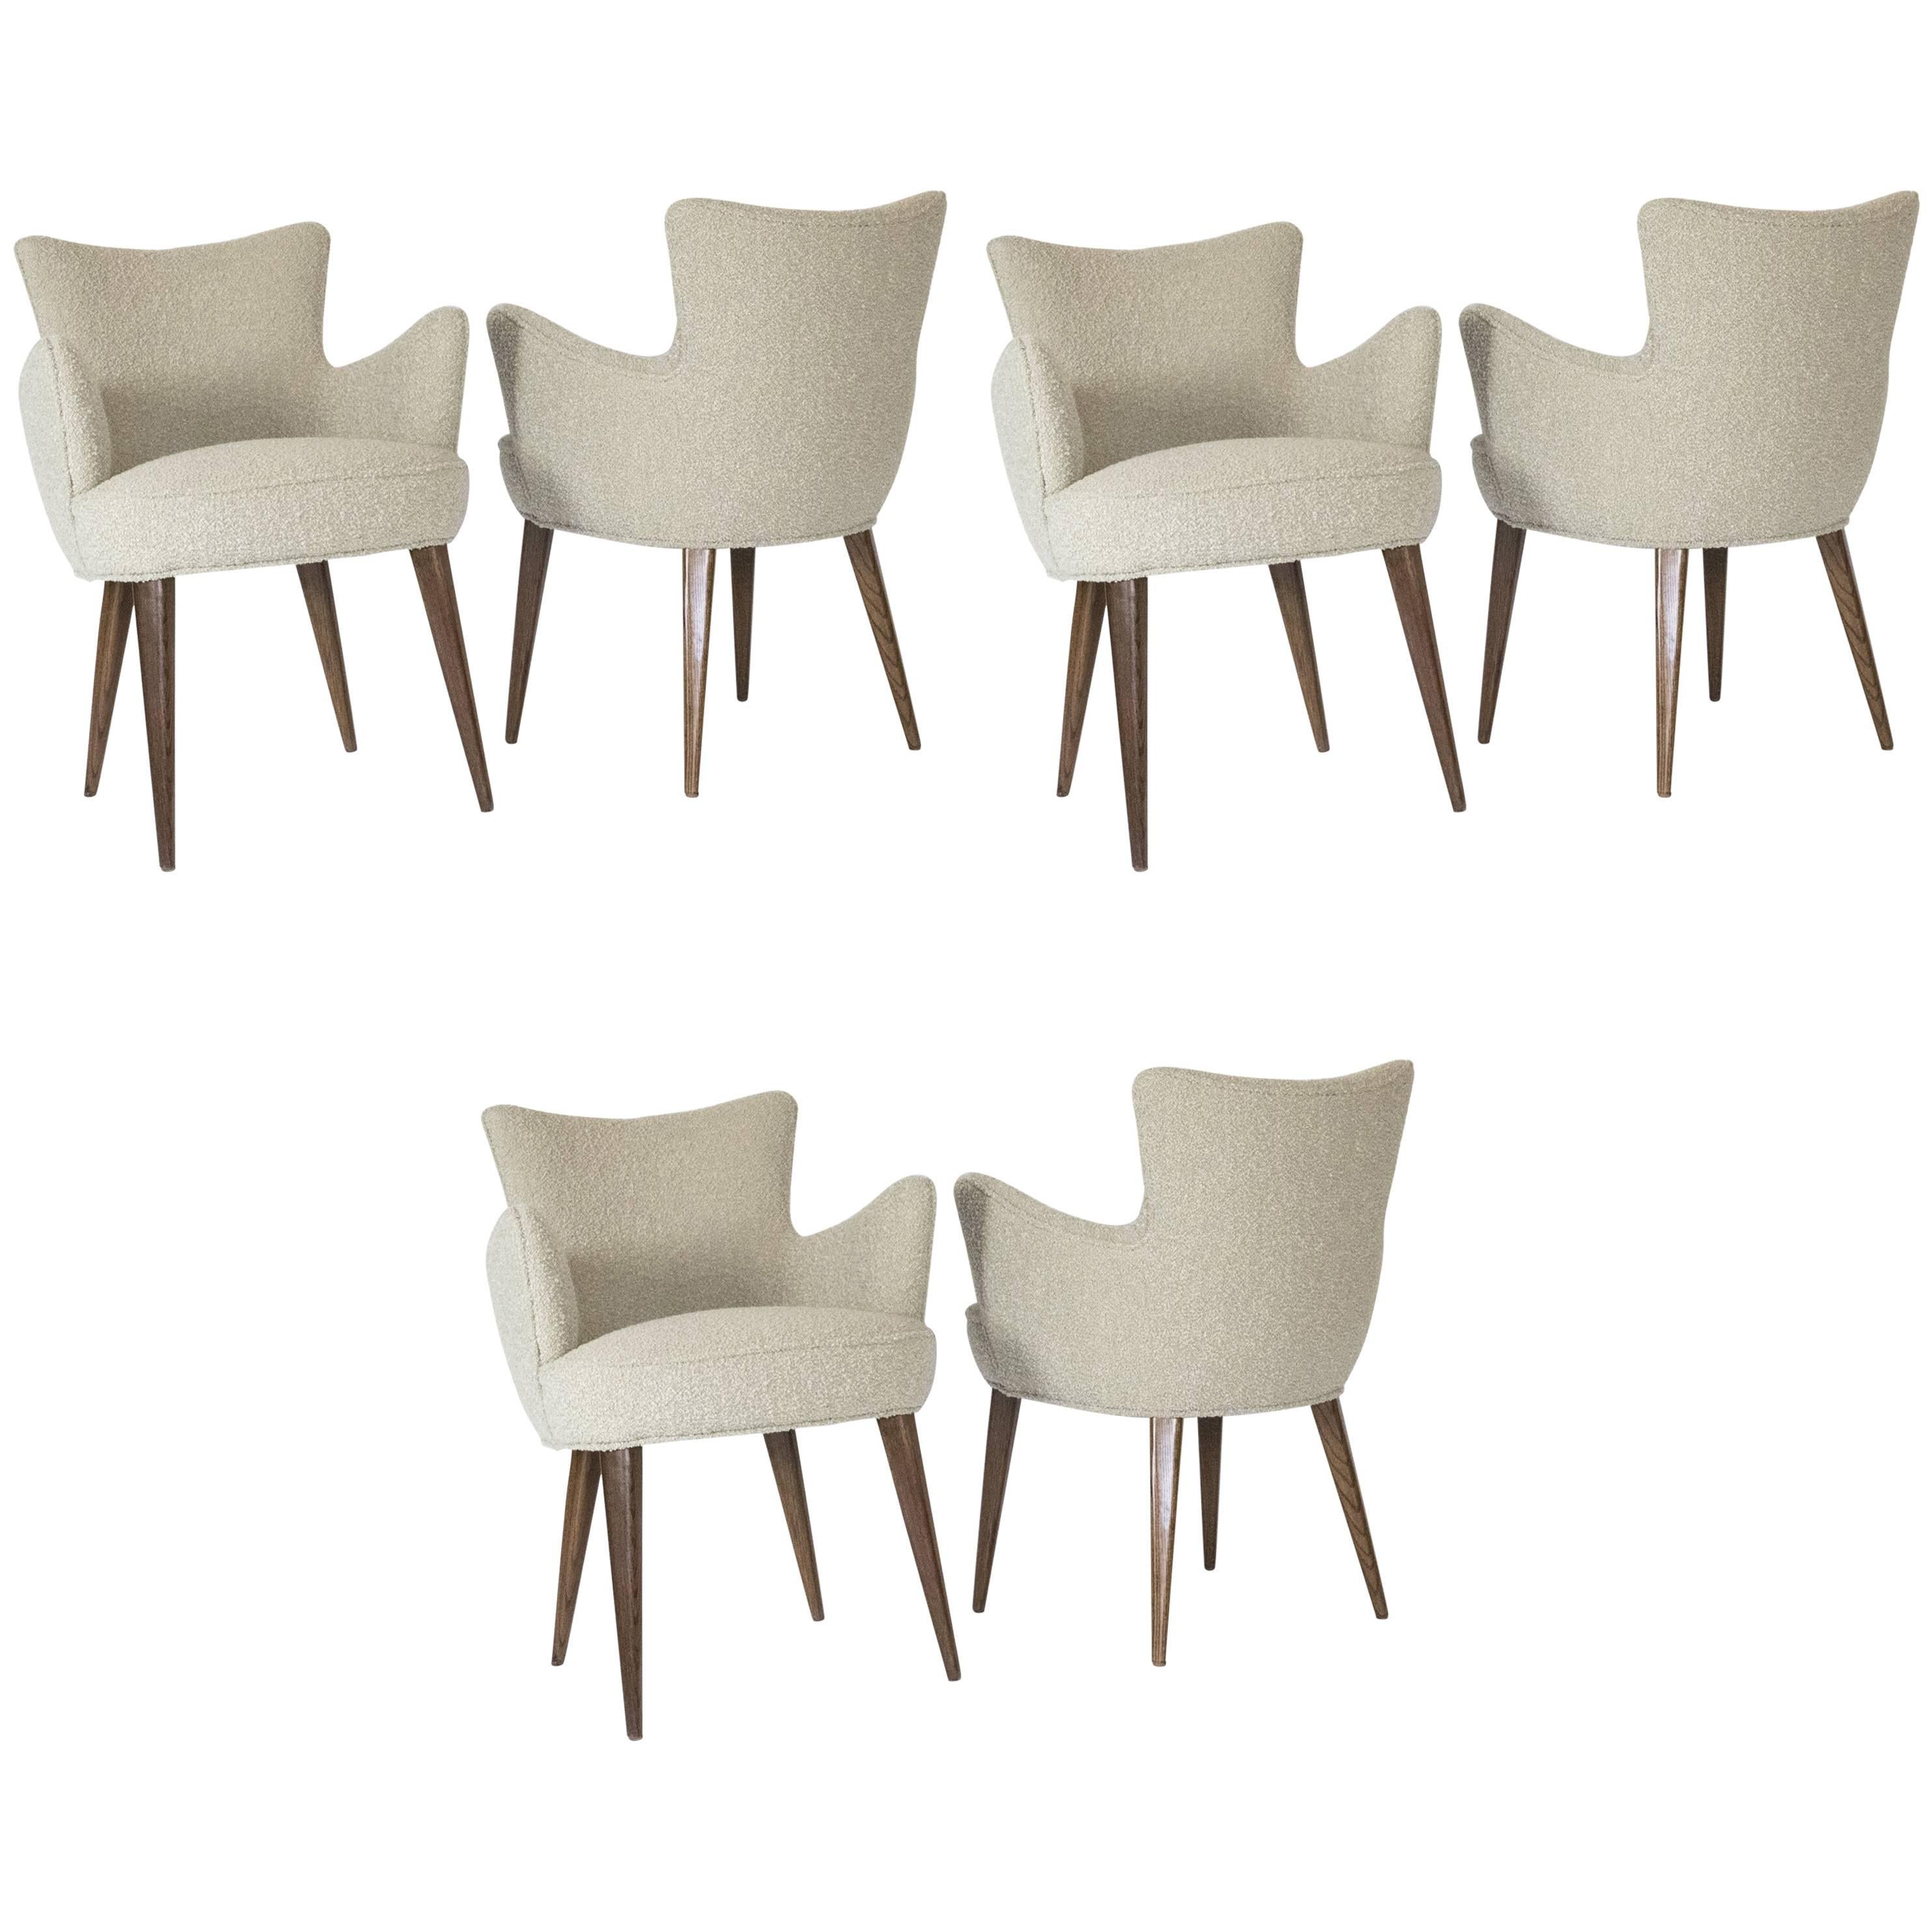 Set of 14 Aube Chairs, by Bourgeois Boheme Atelier